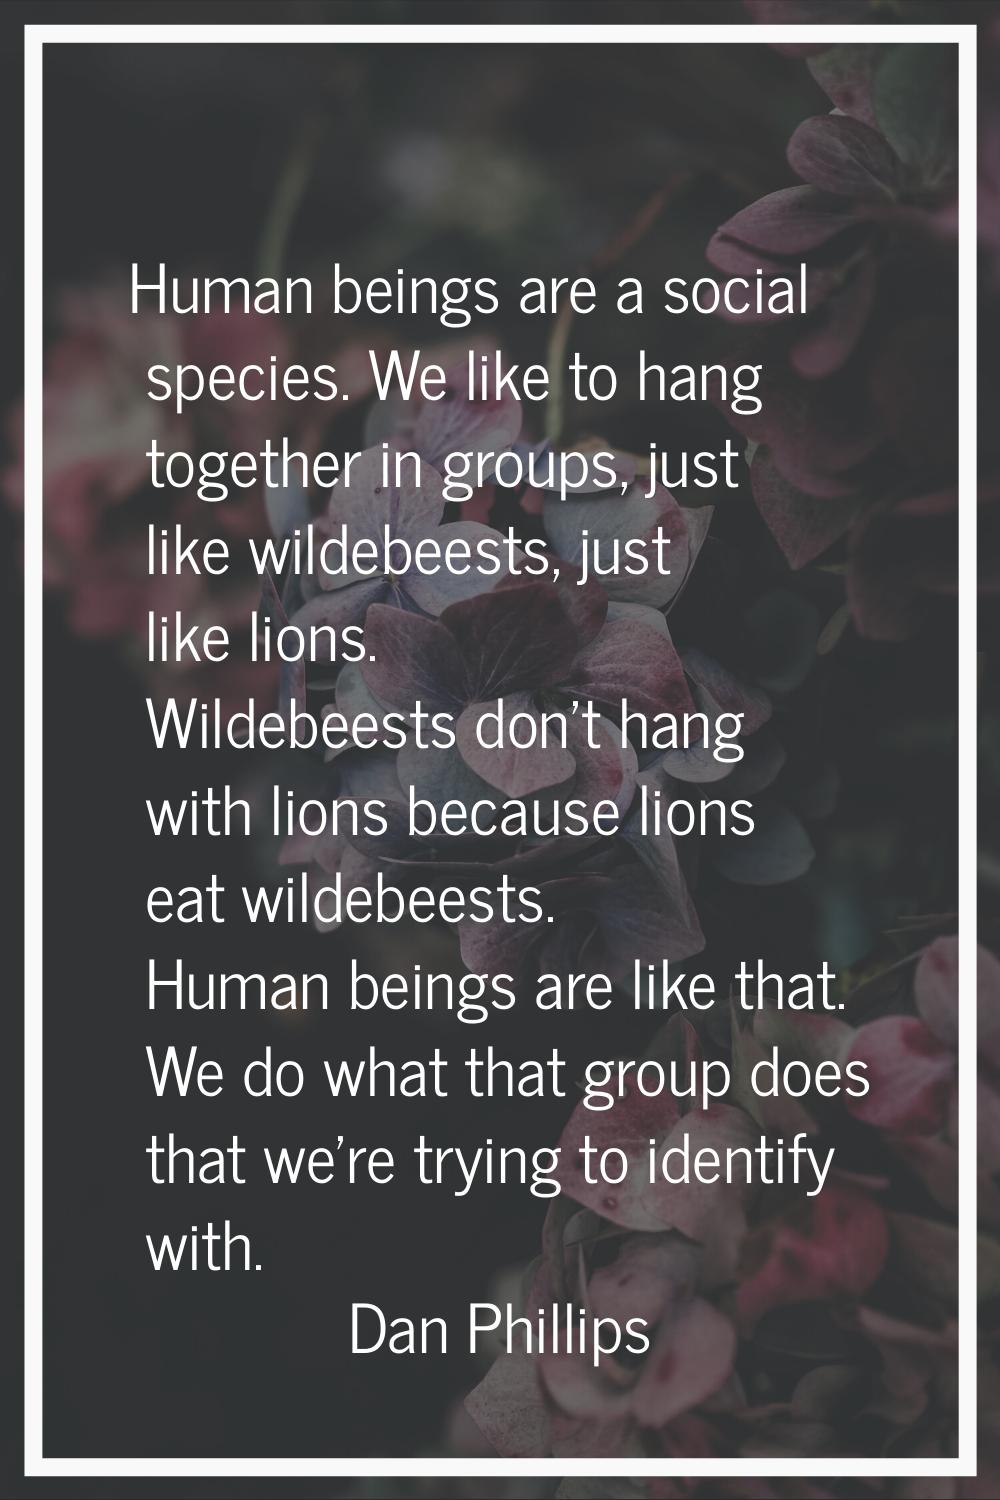 Human beings are a social species. We like to hang together in groups, just like wildebeests, just 